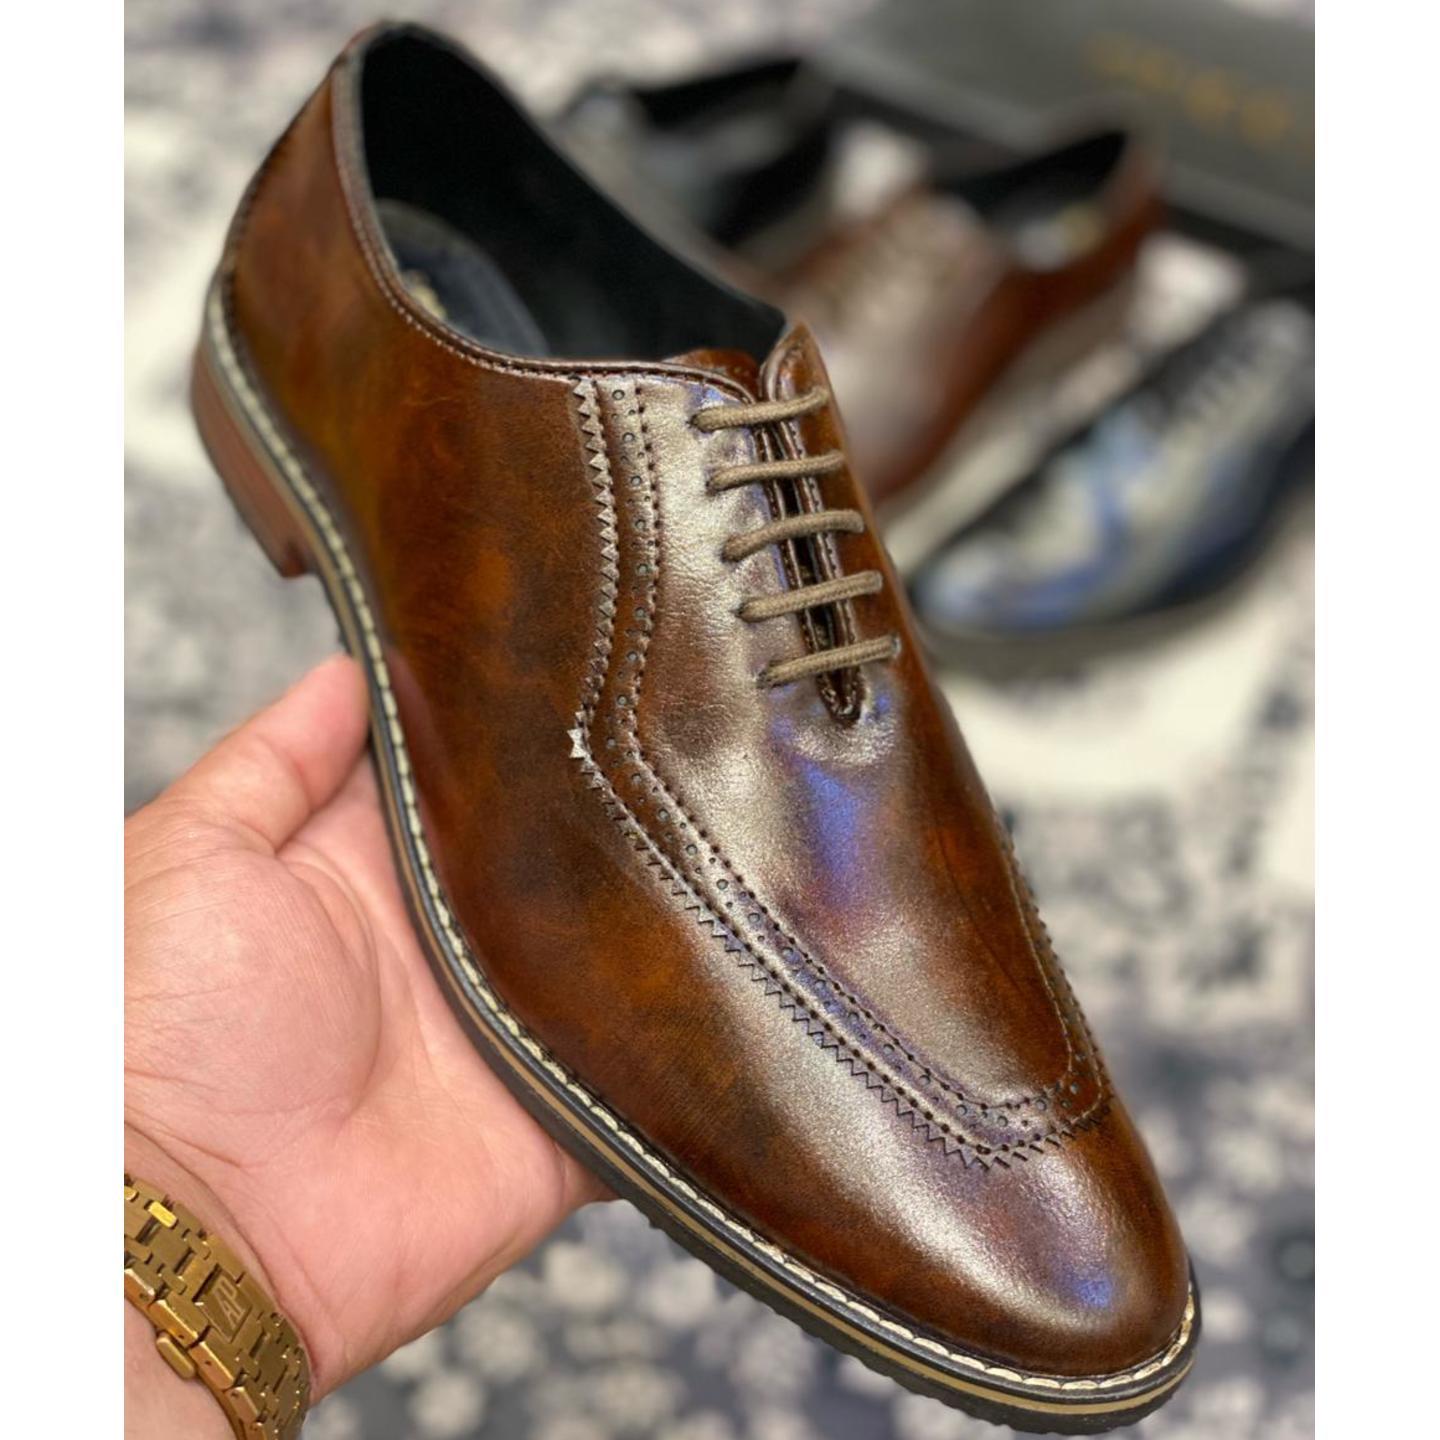 Insta Shoppee Formal Derby Shoes - Black and Brown